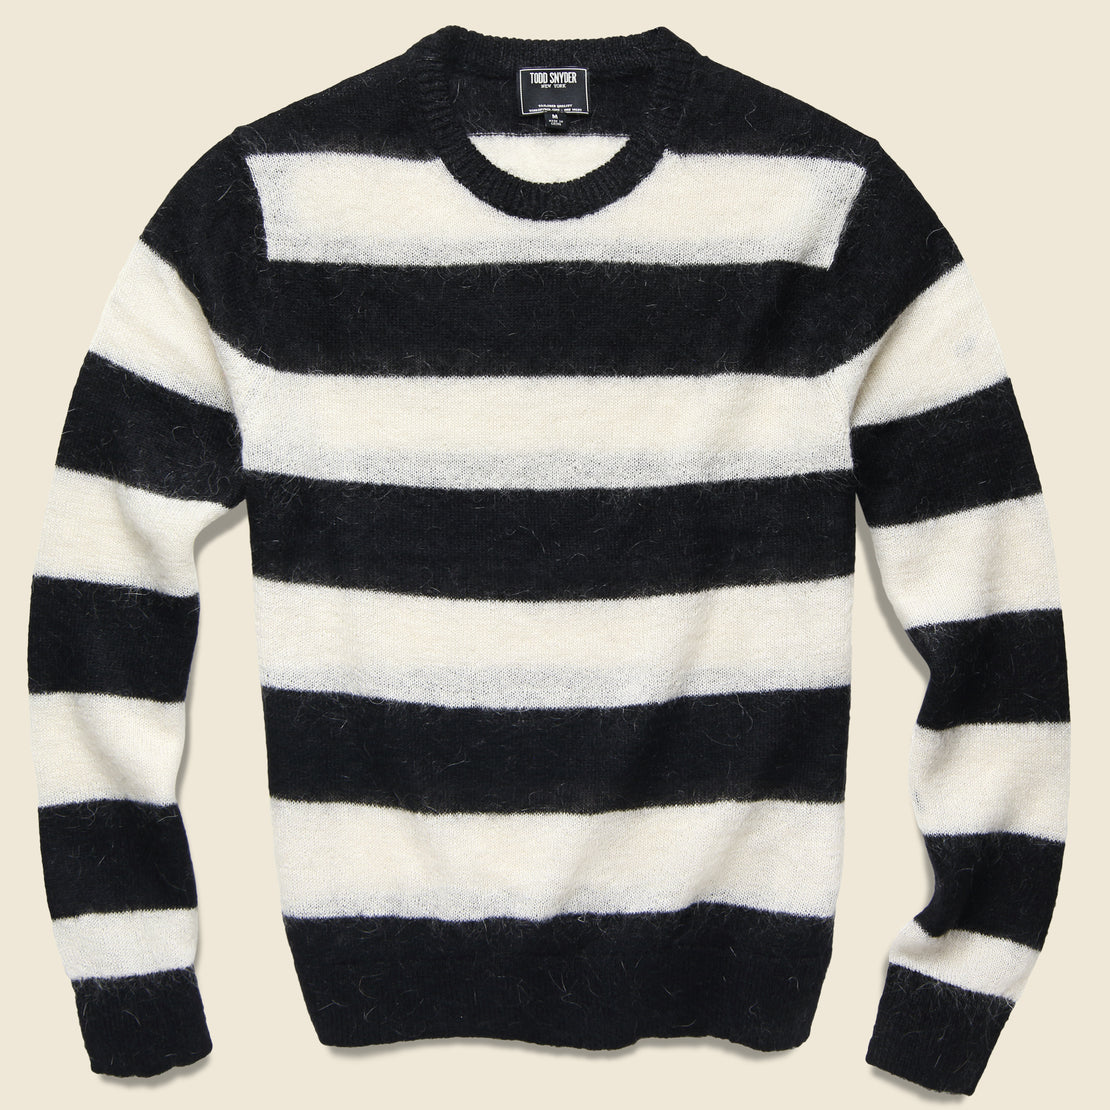 Todd Snyder Mohair Rugby Sweater - Black/White